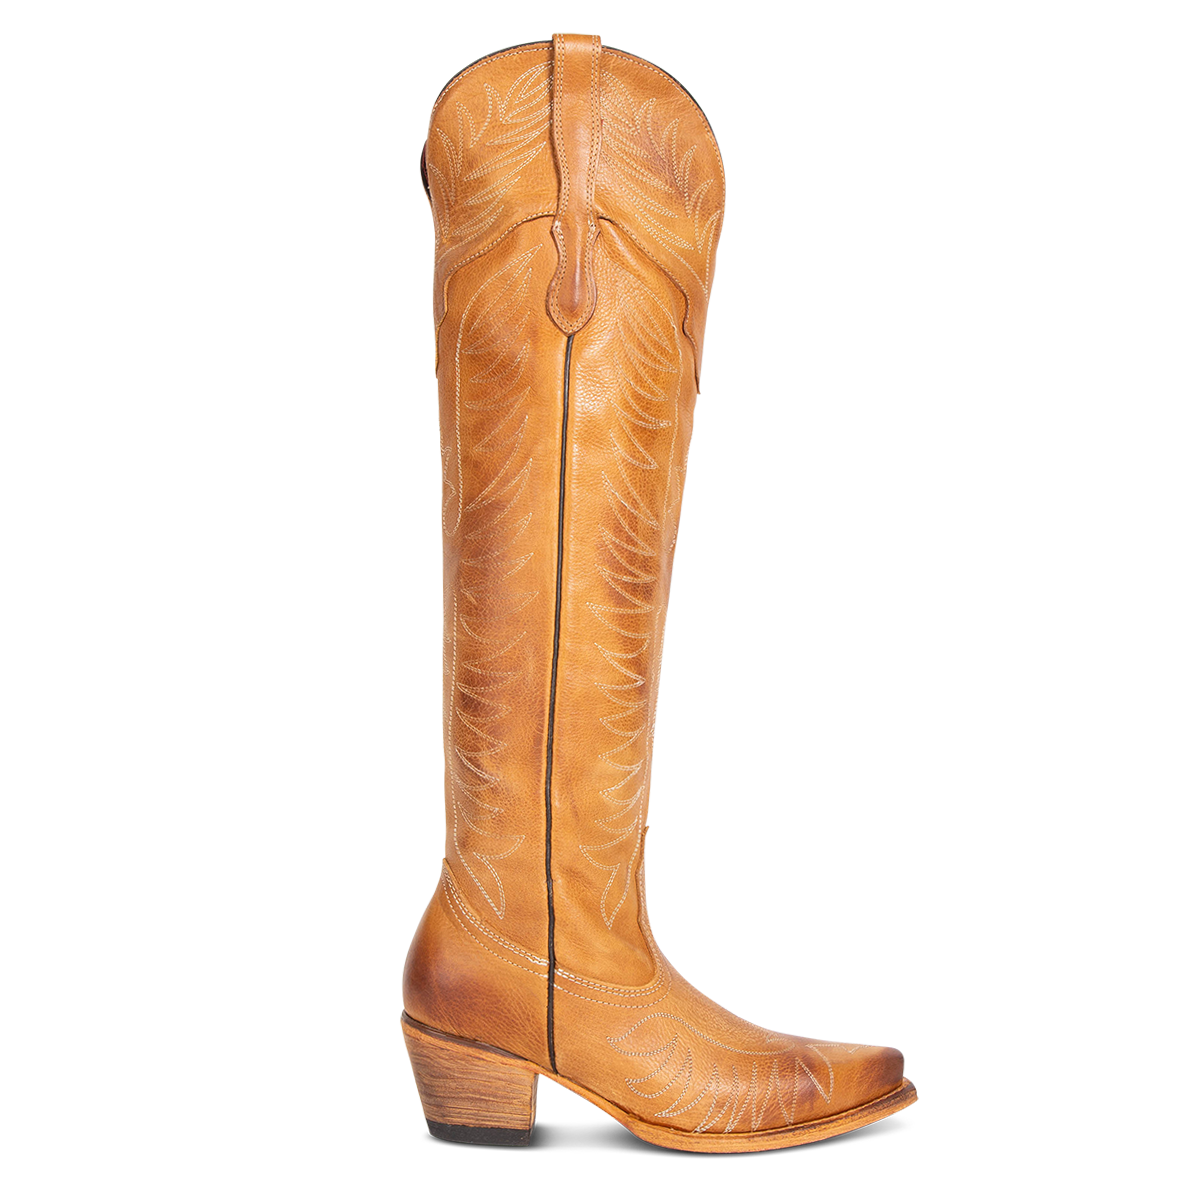 FREEBIRD women's Misty wheat leather tall boot with western stitch detailing and traditional snip toe construction